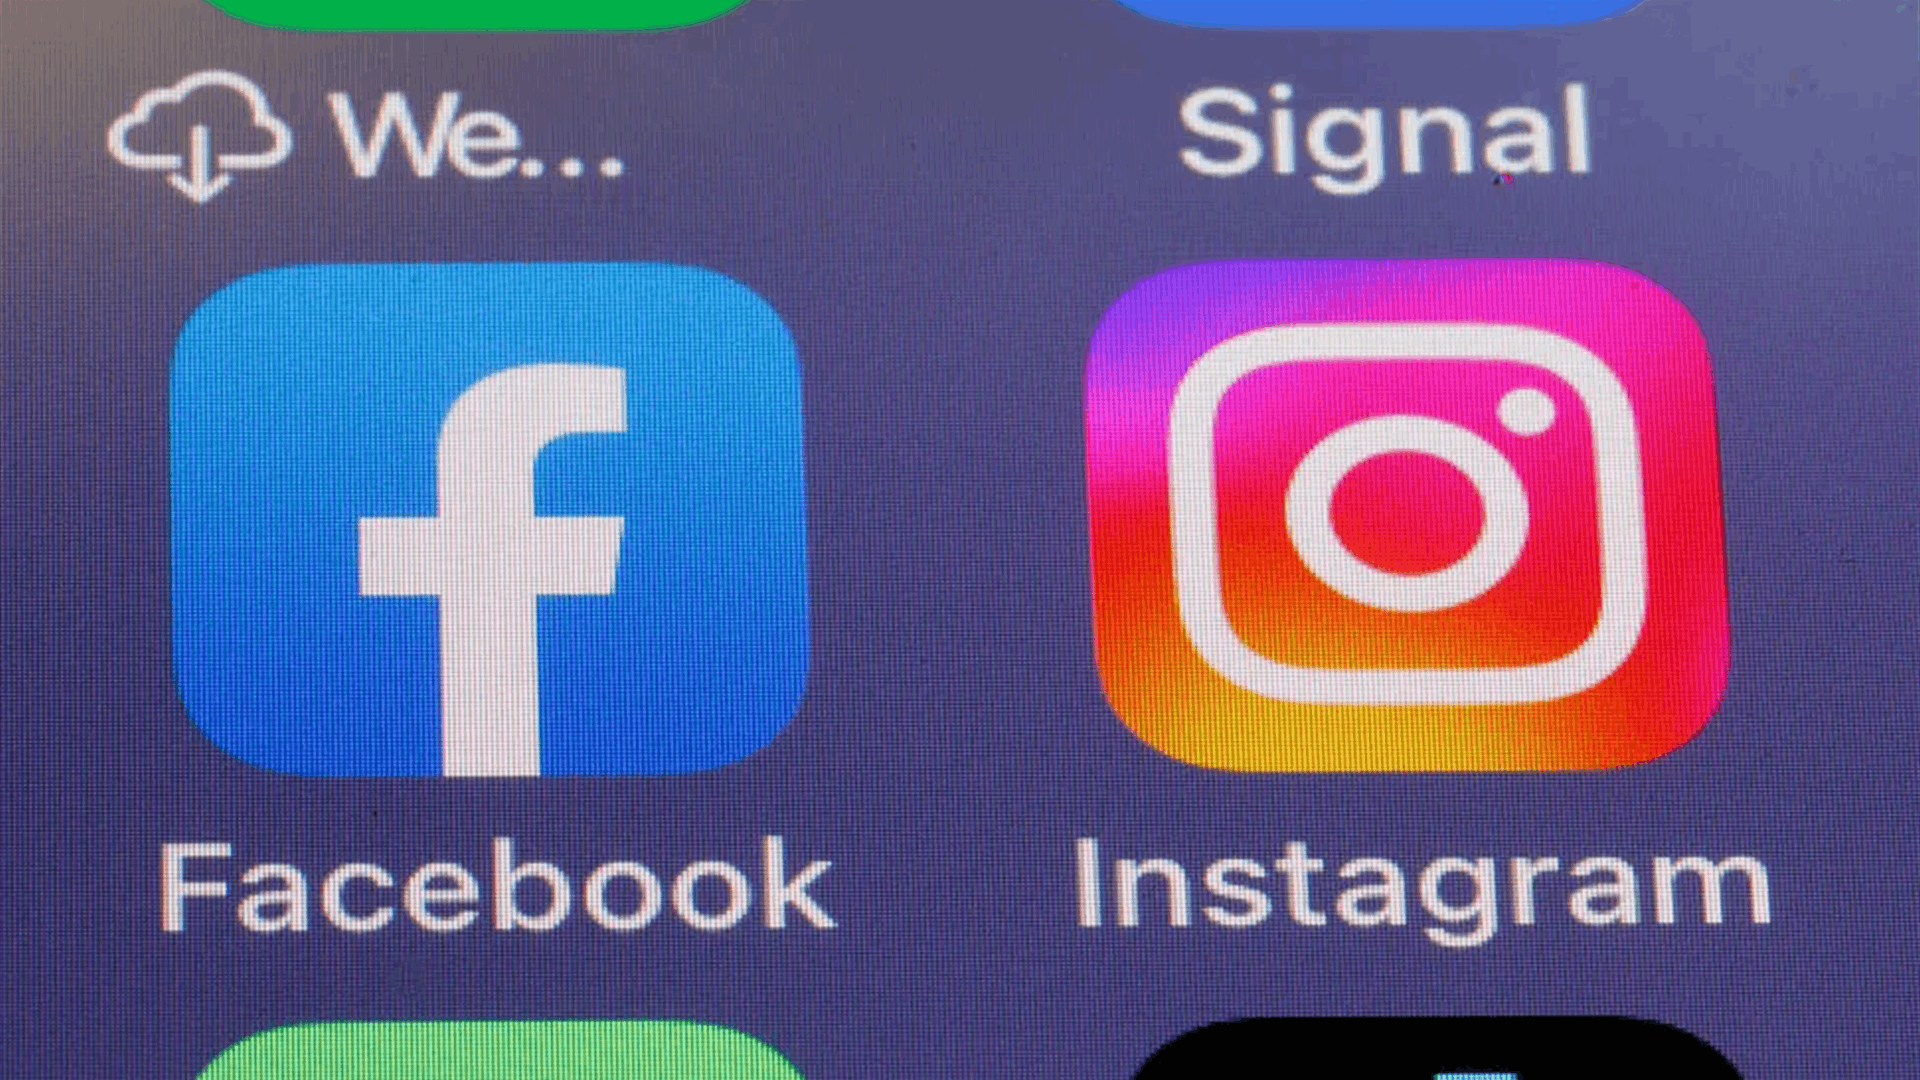 Meta’s behavioral ads banned in Norway on Facebook and Instagram